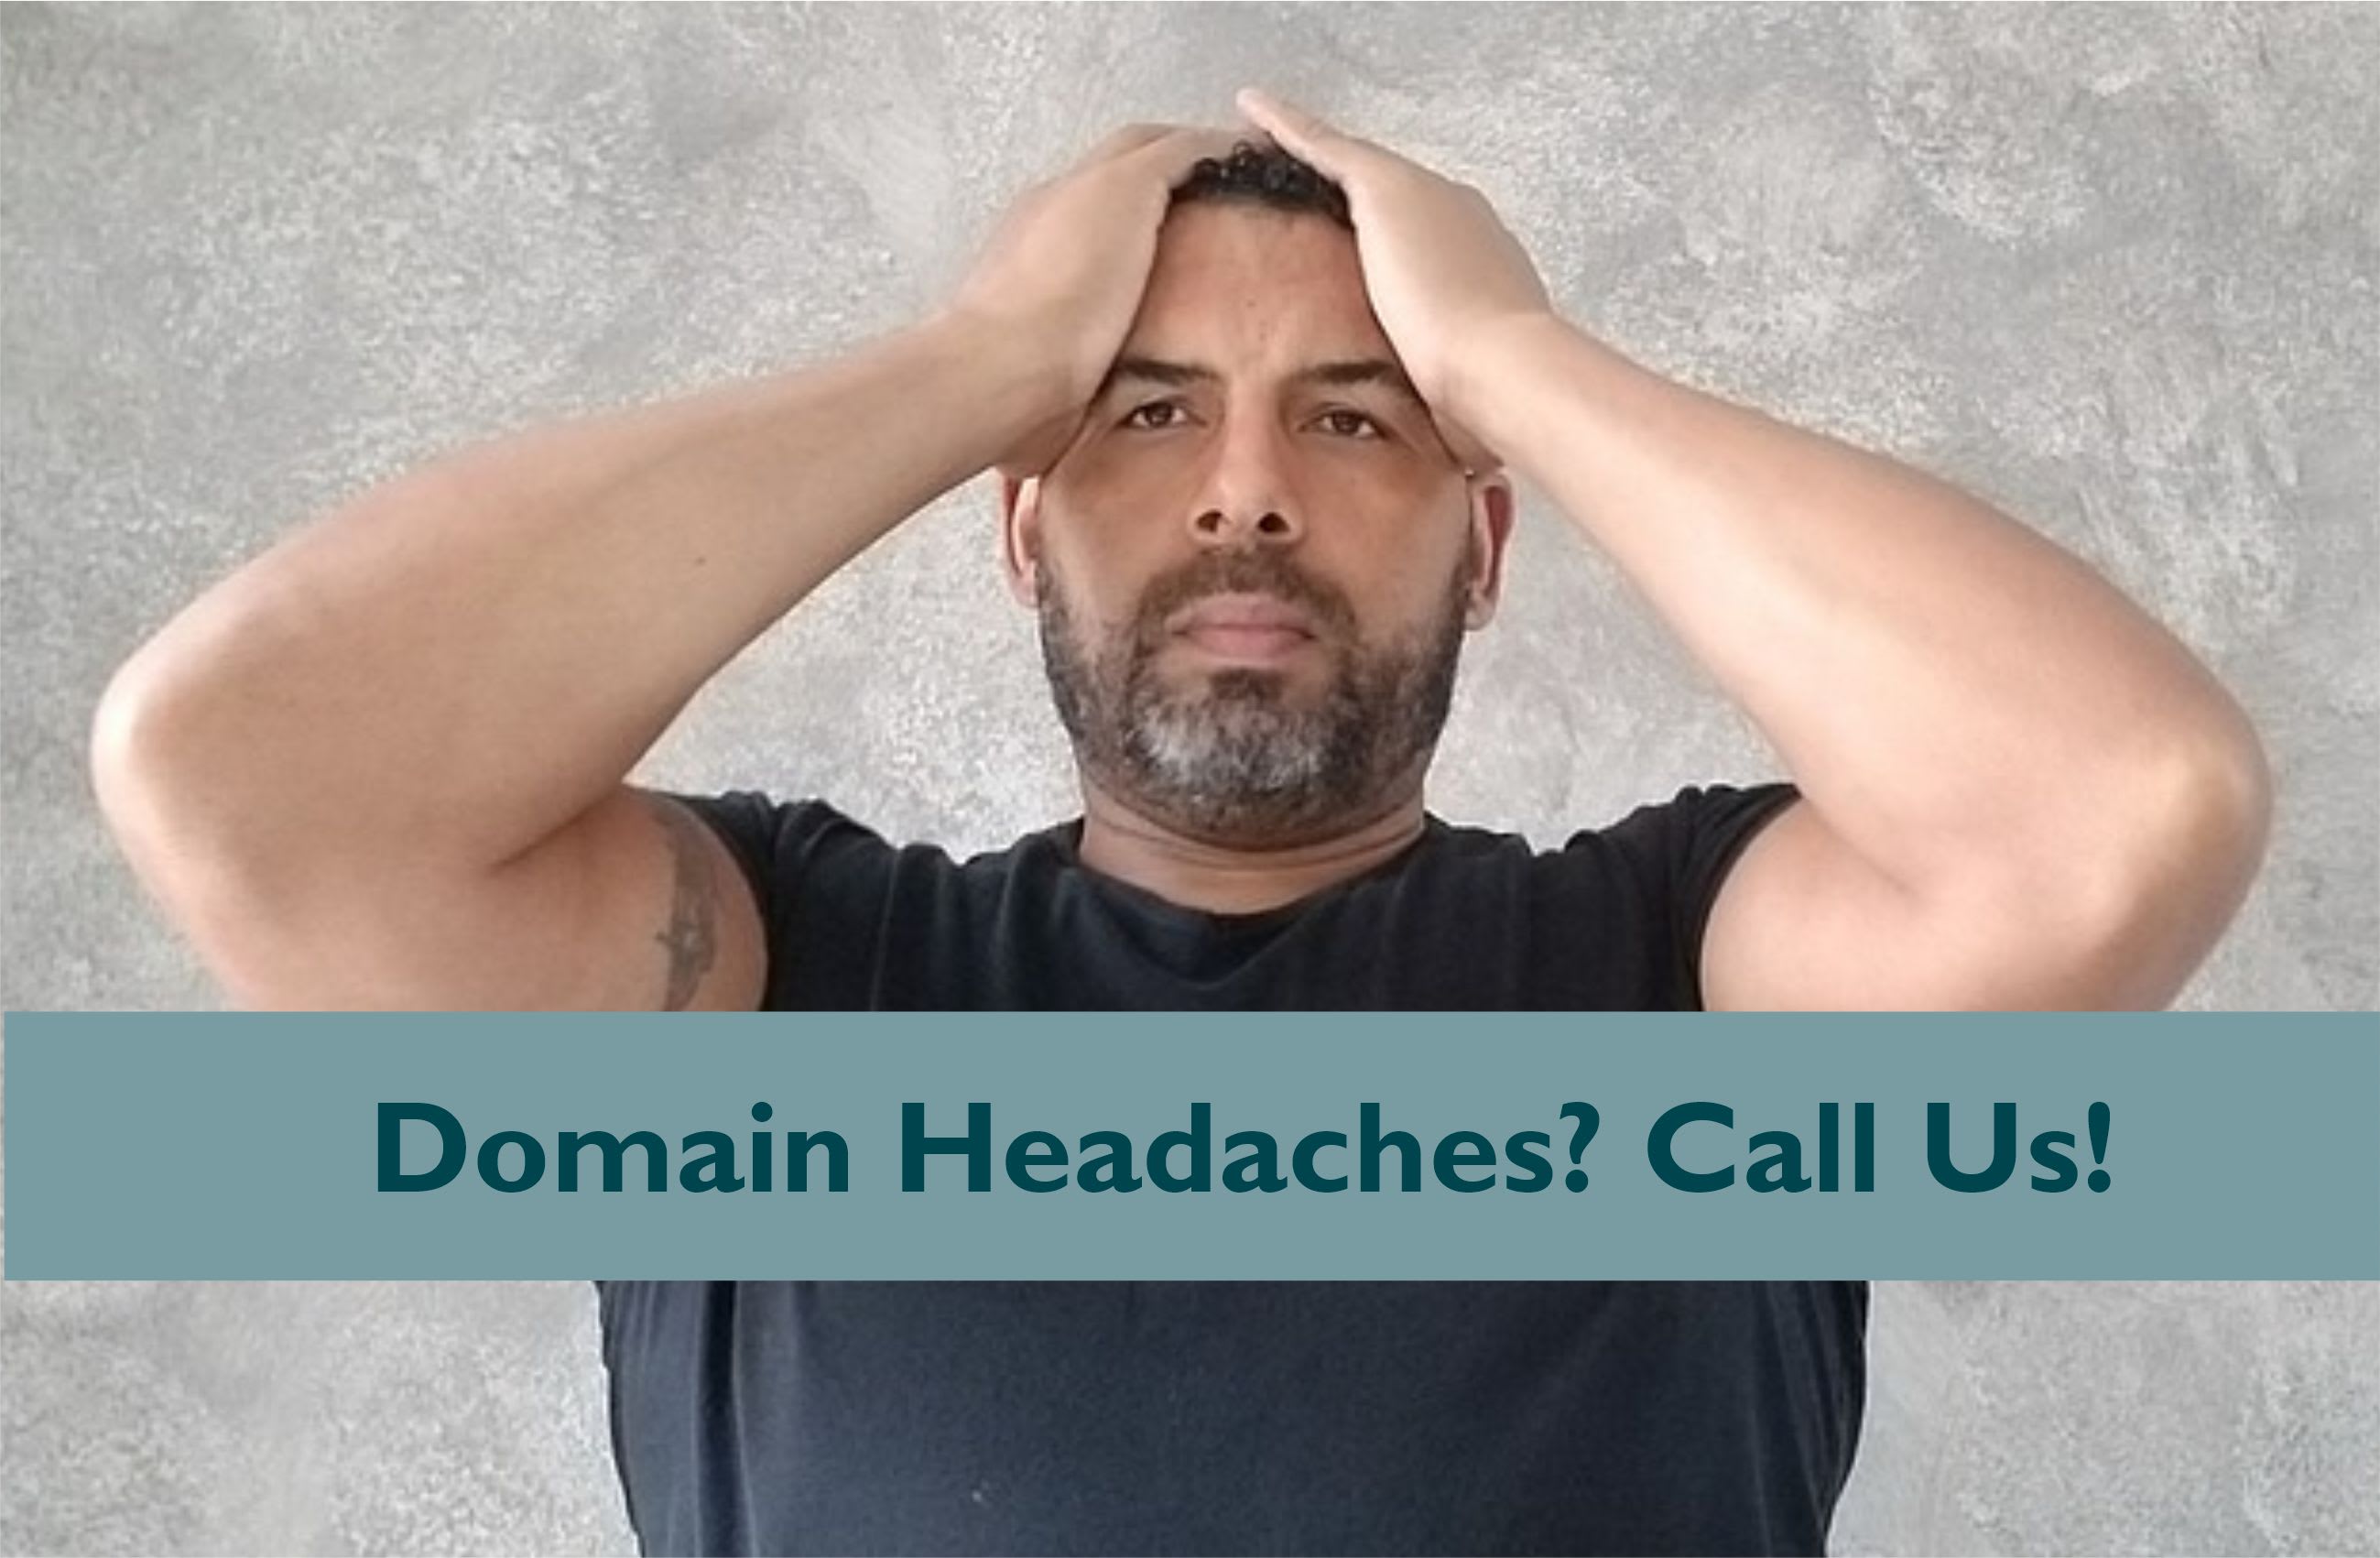 domain headaches, frustrated - call us